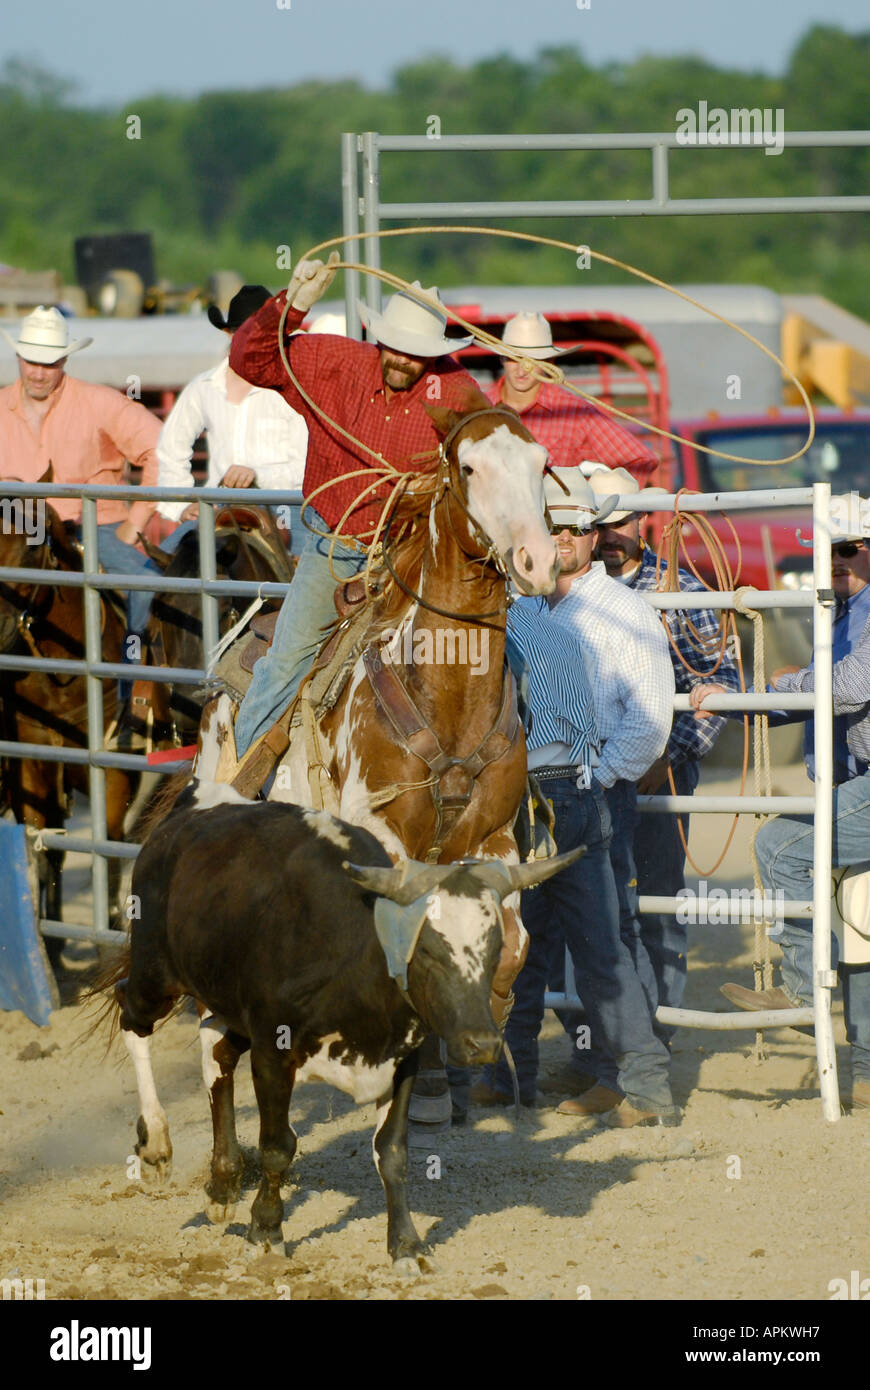 Cowboys participate in Rodeo calf roping event Stock Photo